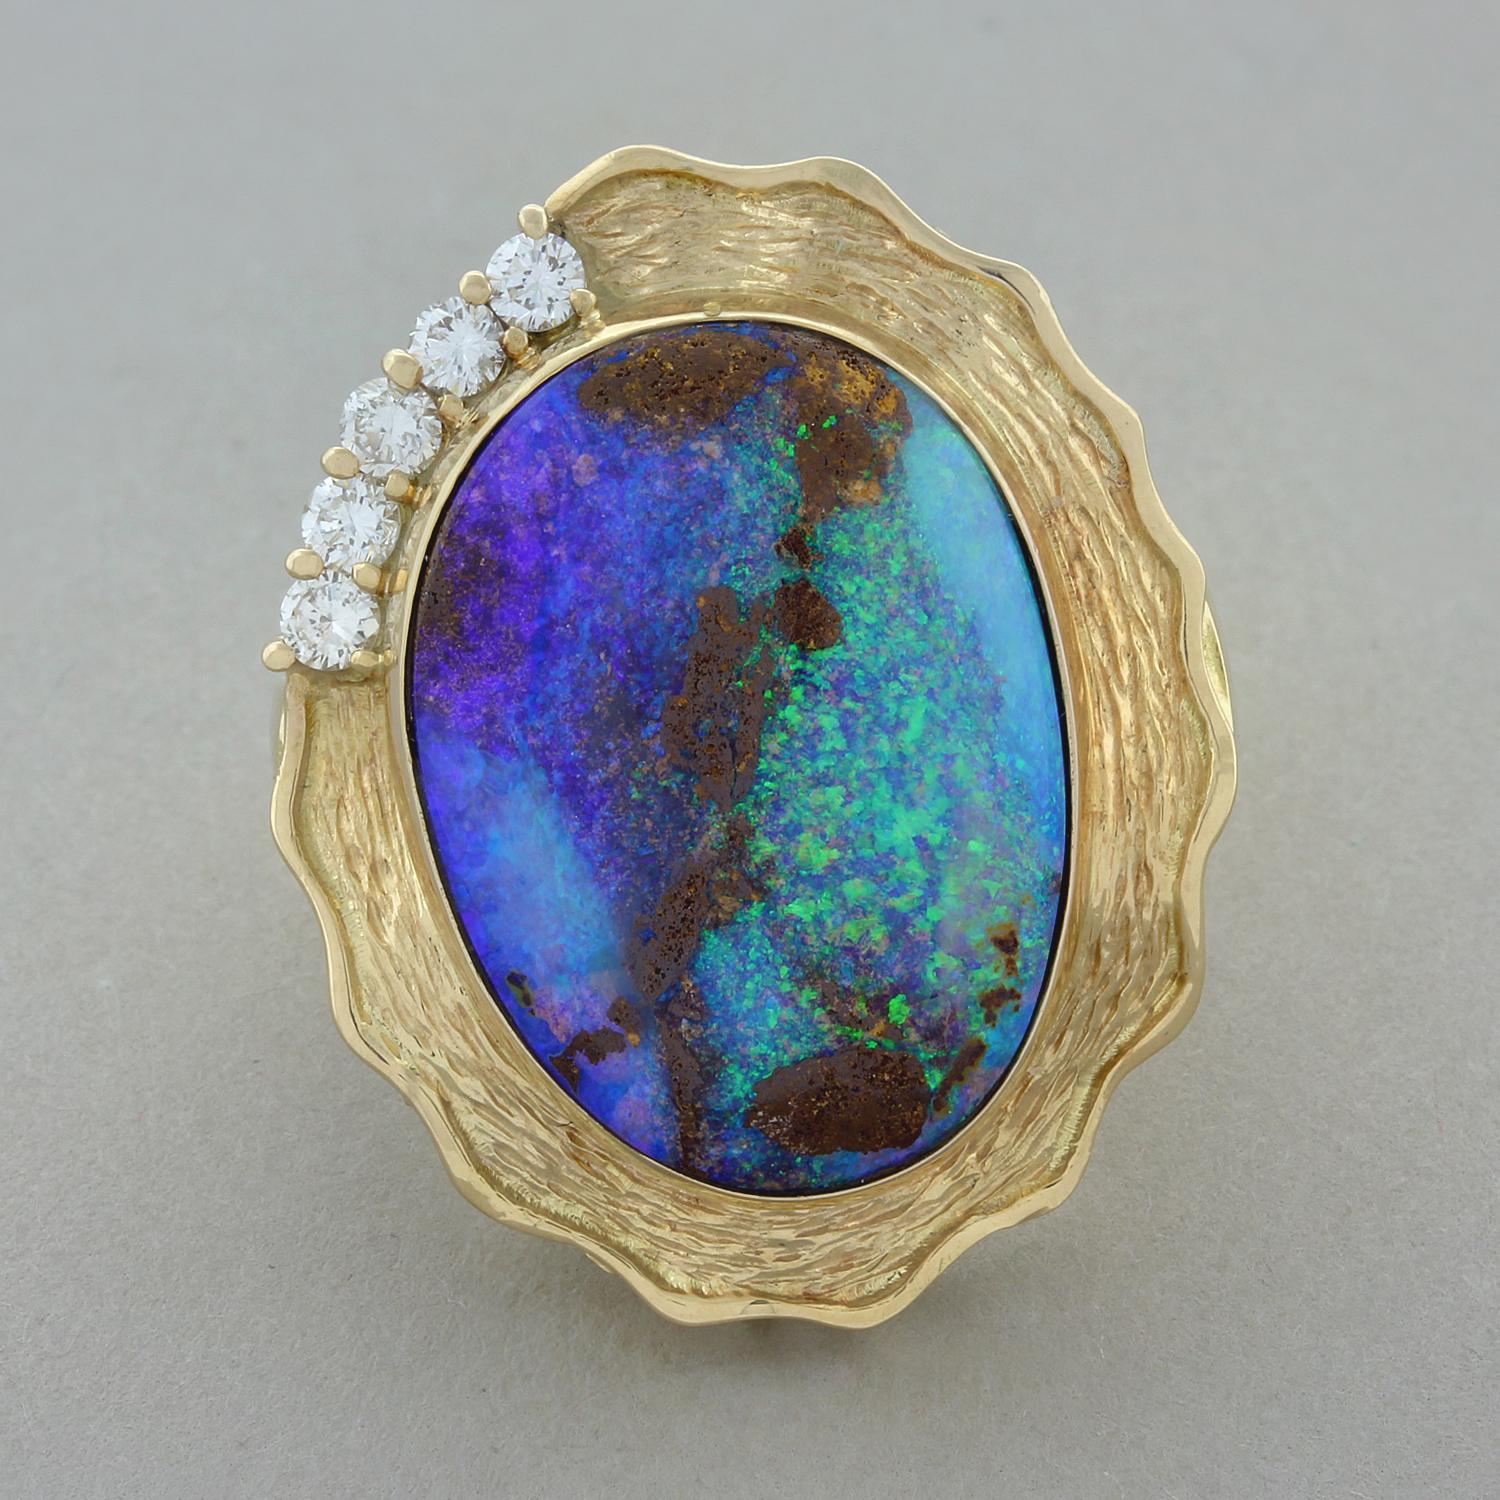 A magnificent ring featuring a 14.15 carat boulder opal bezel with exceptional play of color. The opal is accented by 5 round brilliant cut diamonds totaling 0.32 carats. The ring is hand fabricated in 18K yellow gold with a textured finish around